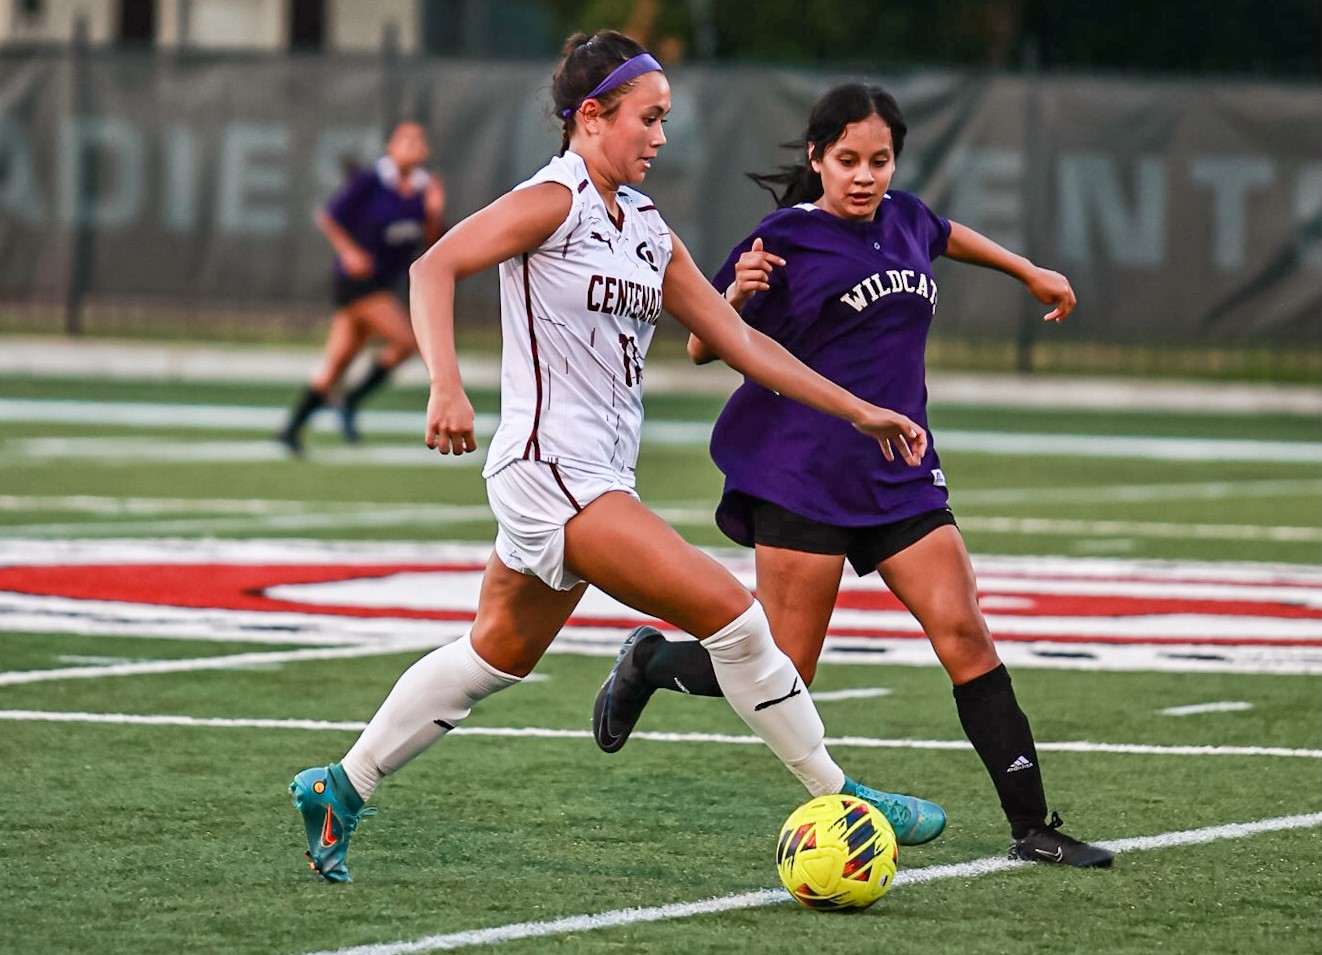 The Ladies fell 2-0 at Dallas on Friday evening.